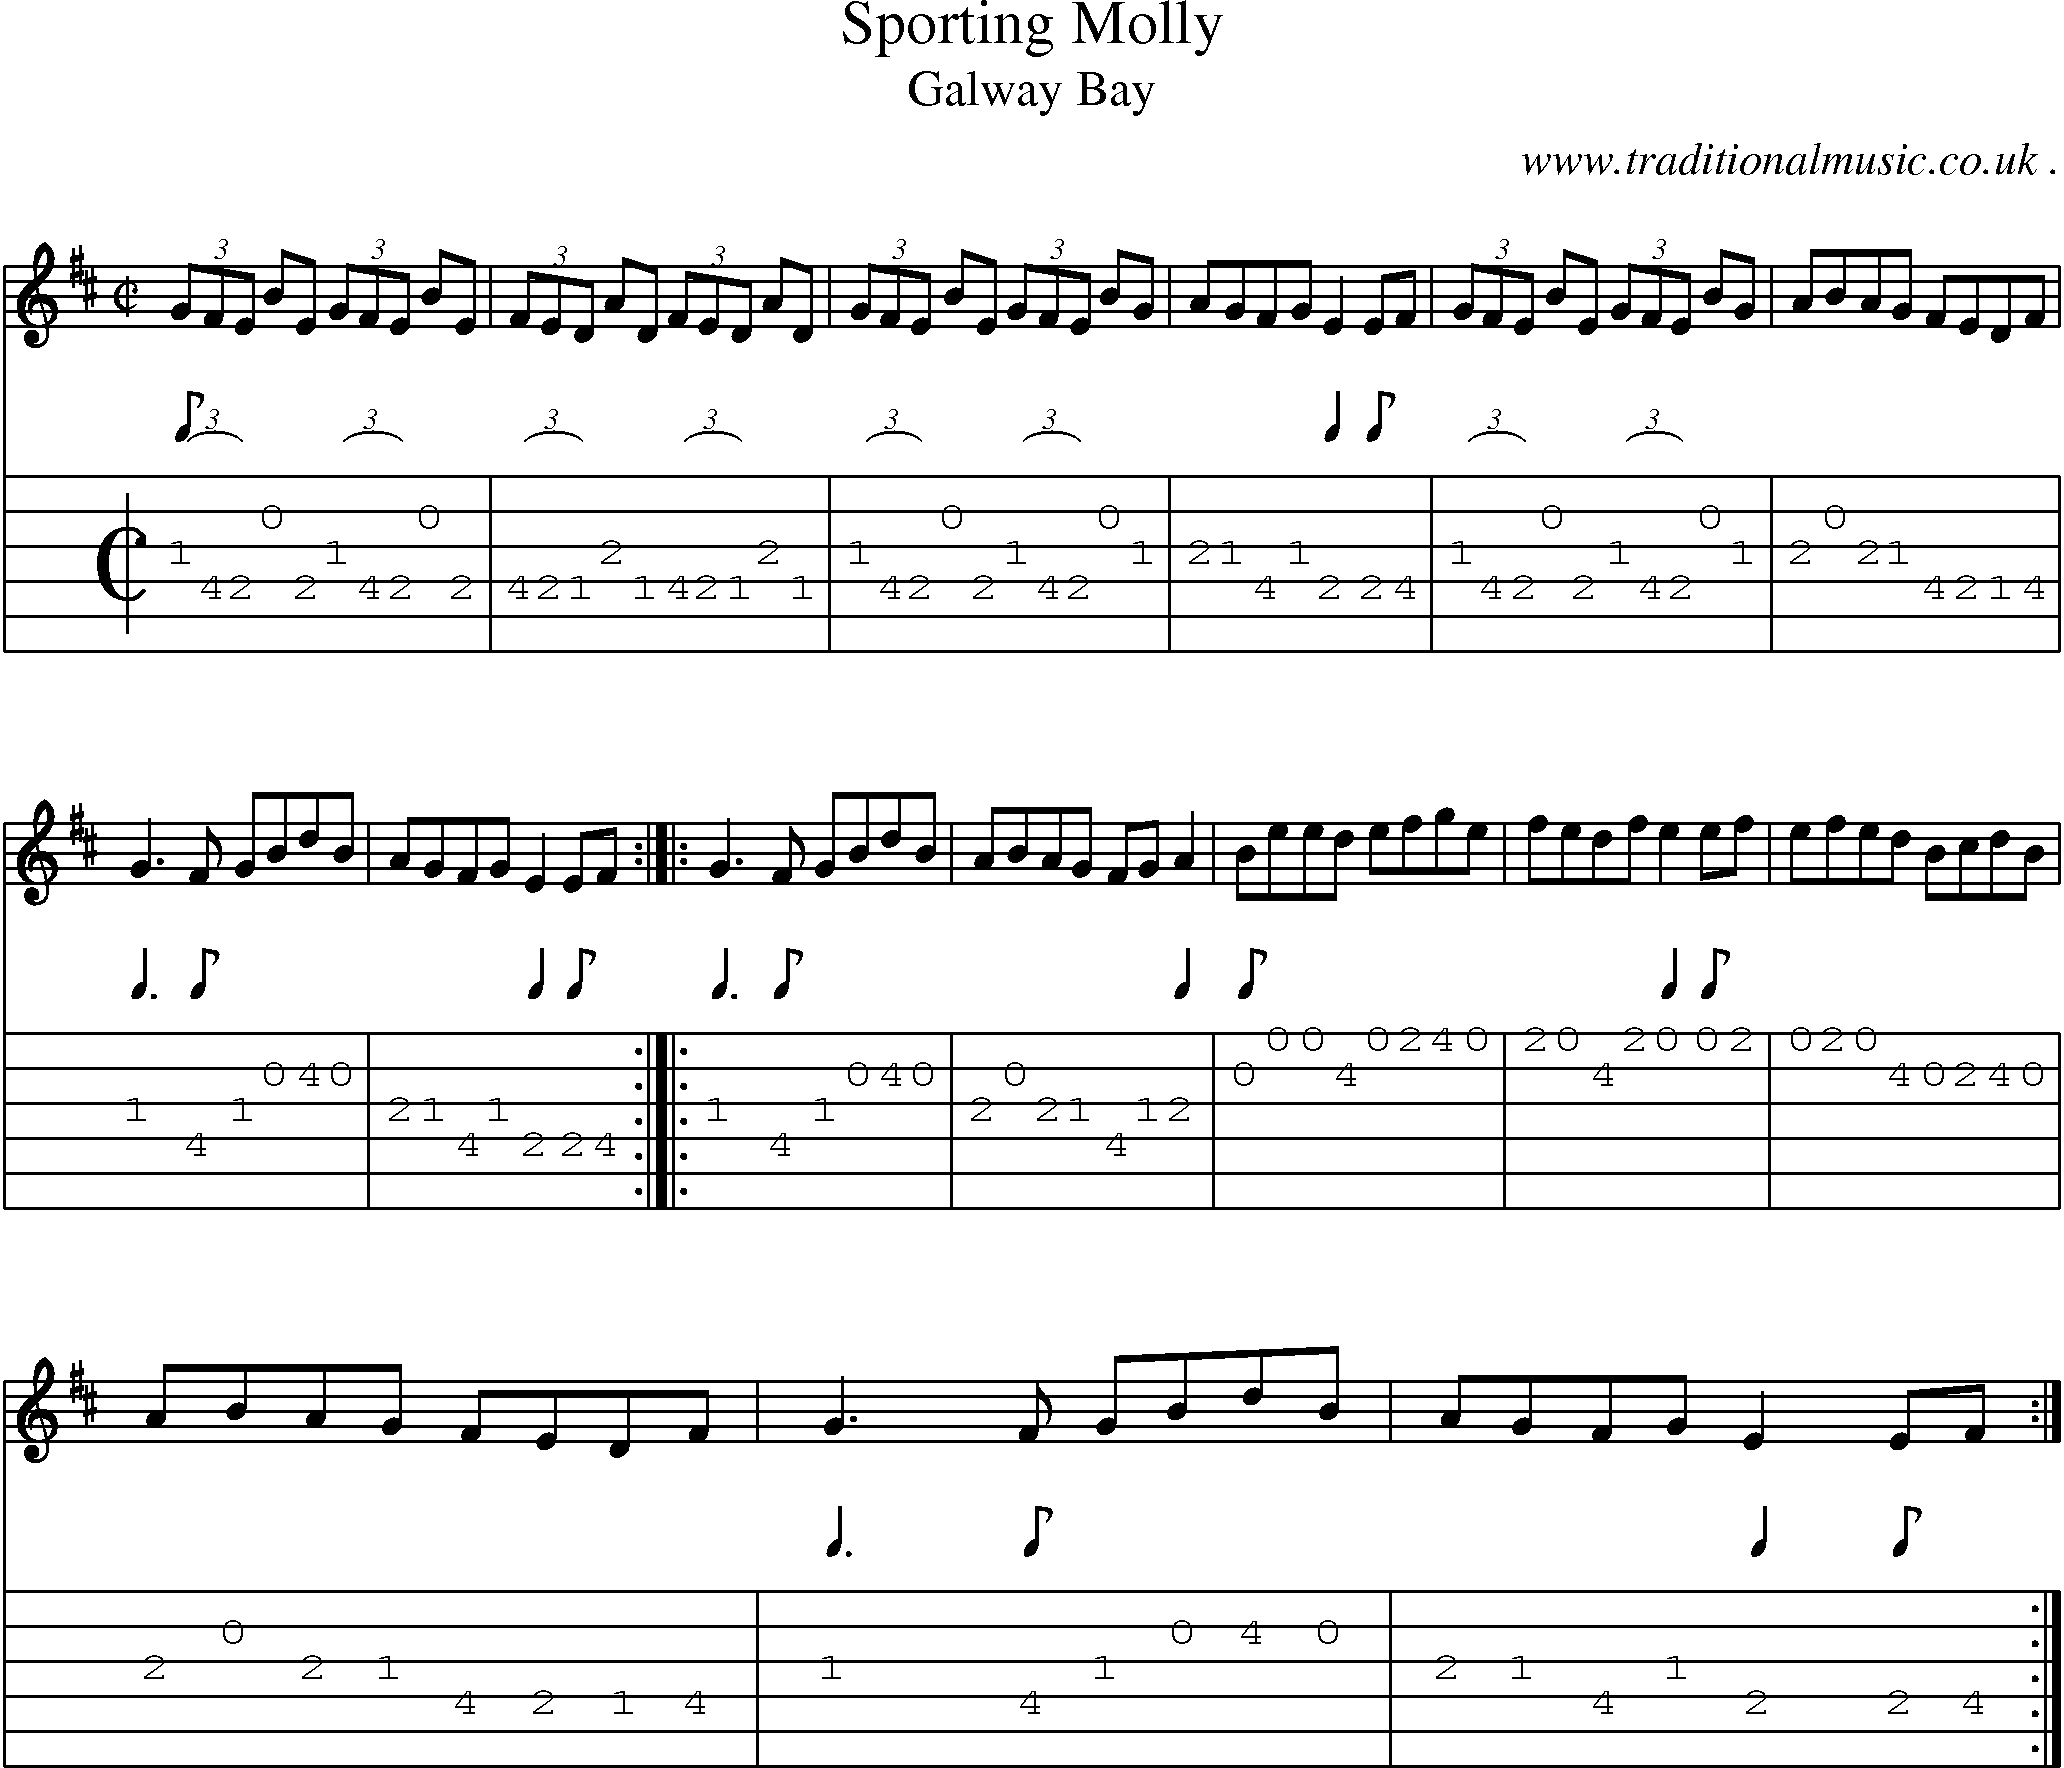 Sheet-Music and Guitar Tabs for Sporting Molly